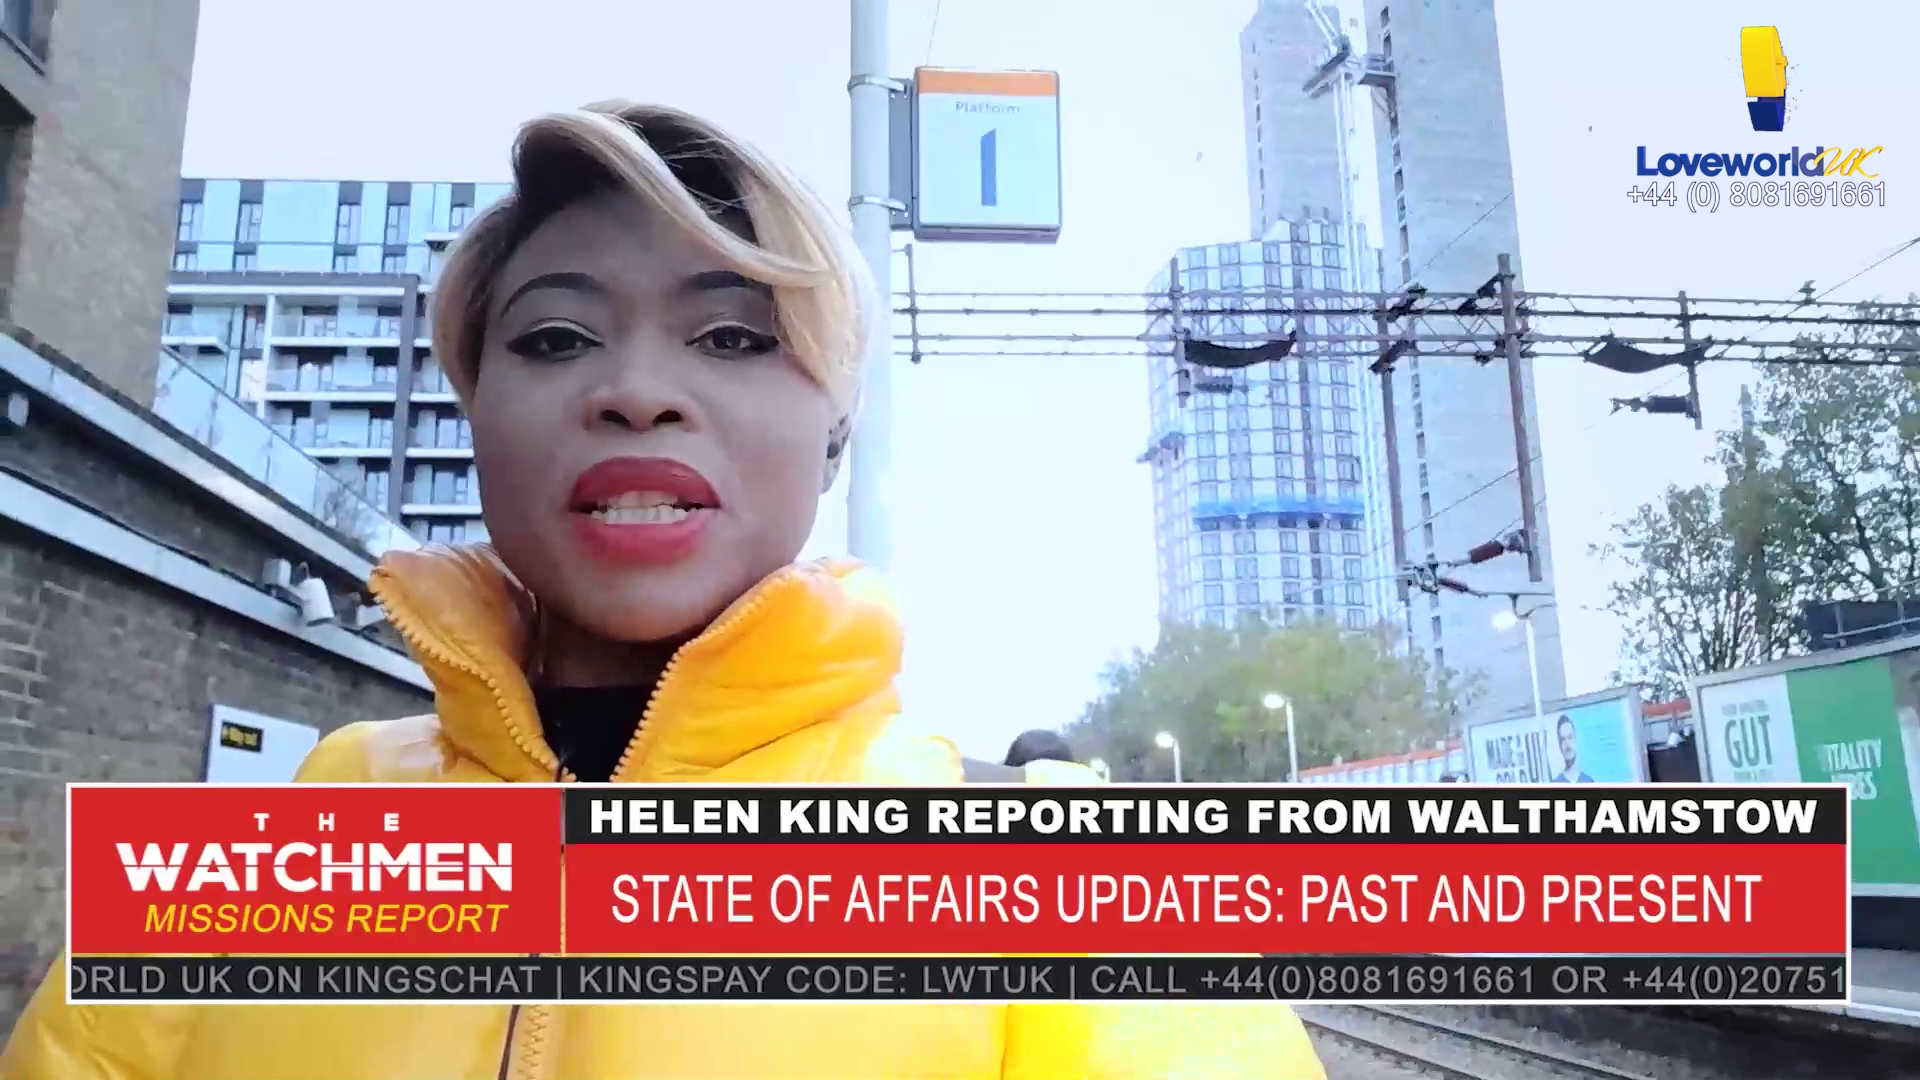 THE WATCHMEN_EP 97: HELEN KING'S SPECIAL REPORTS IN ICONIC LOCATIONS_TOTTENHAM HALE, WALTHAMSTOW, SHADWELL, LIMEHOUSE, POPLAR